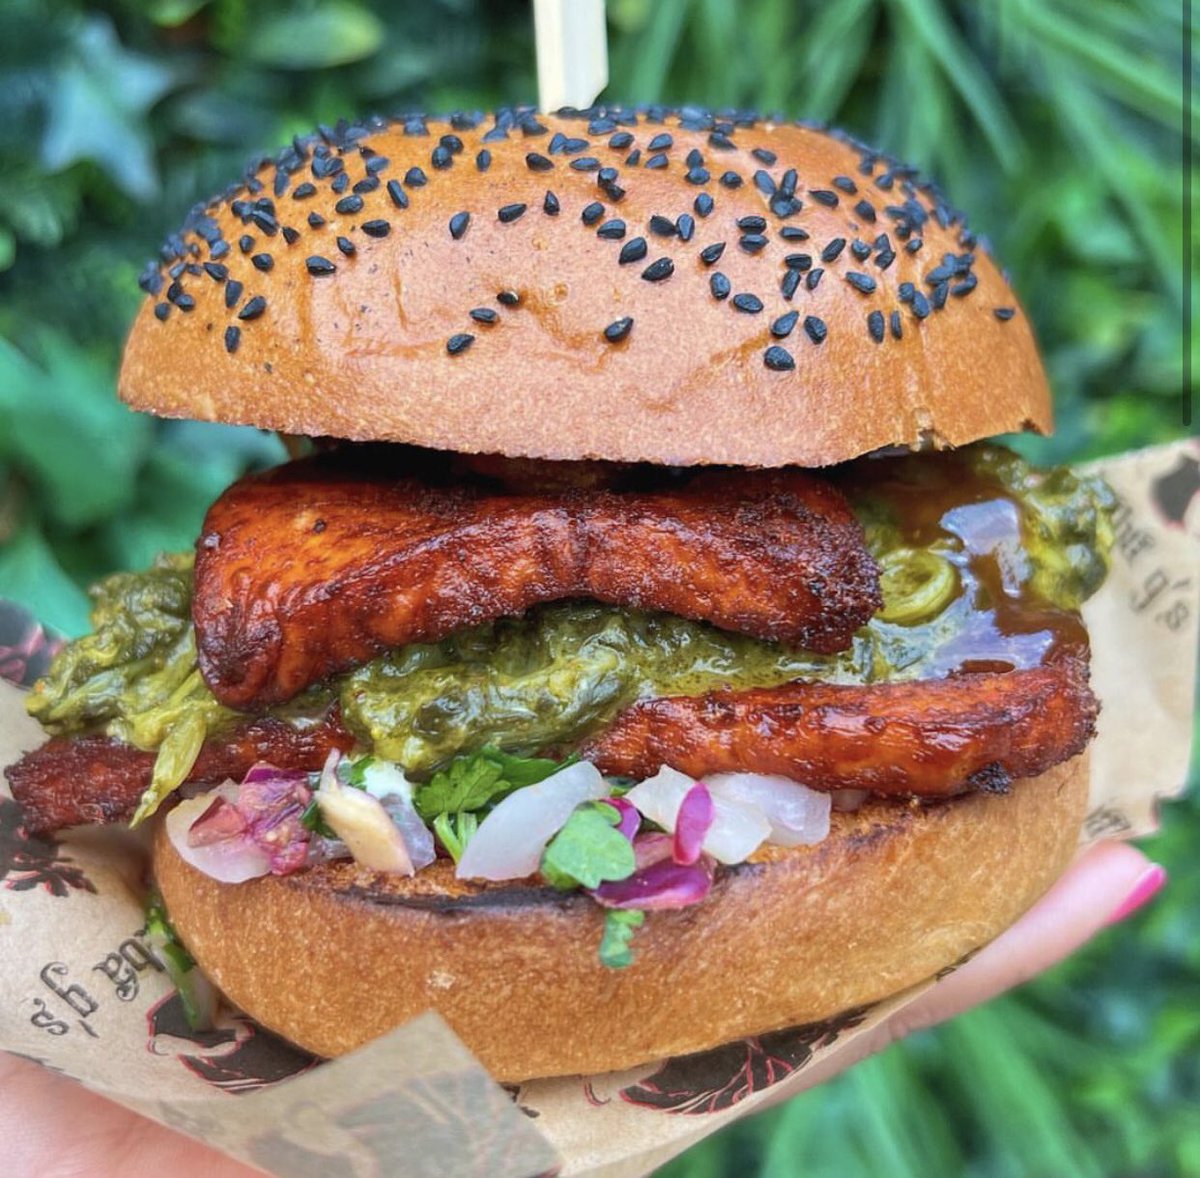 Midweek burger antics? You got it 💥👊🏾 This is a snap of our Saag Paneer - delicious spiced wedges of paneer cheese, a special Saag spinach topping, an onion bhaji, chutney, mango pulp… it’s all going on! Grab yours today. This one papped at @VinegarYardLDN 👌🏾 📸 @feastlondon